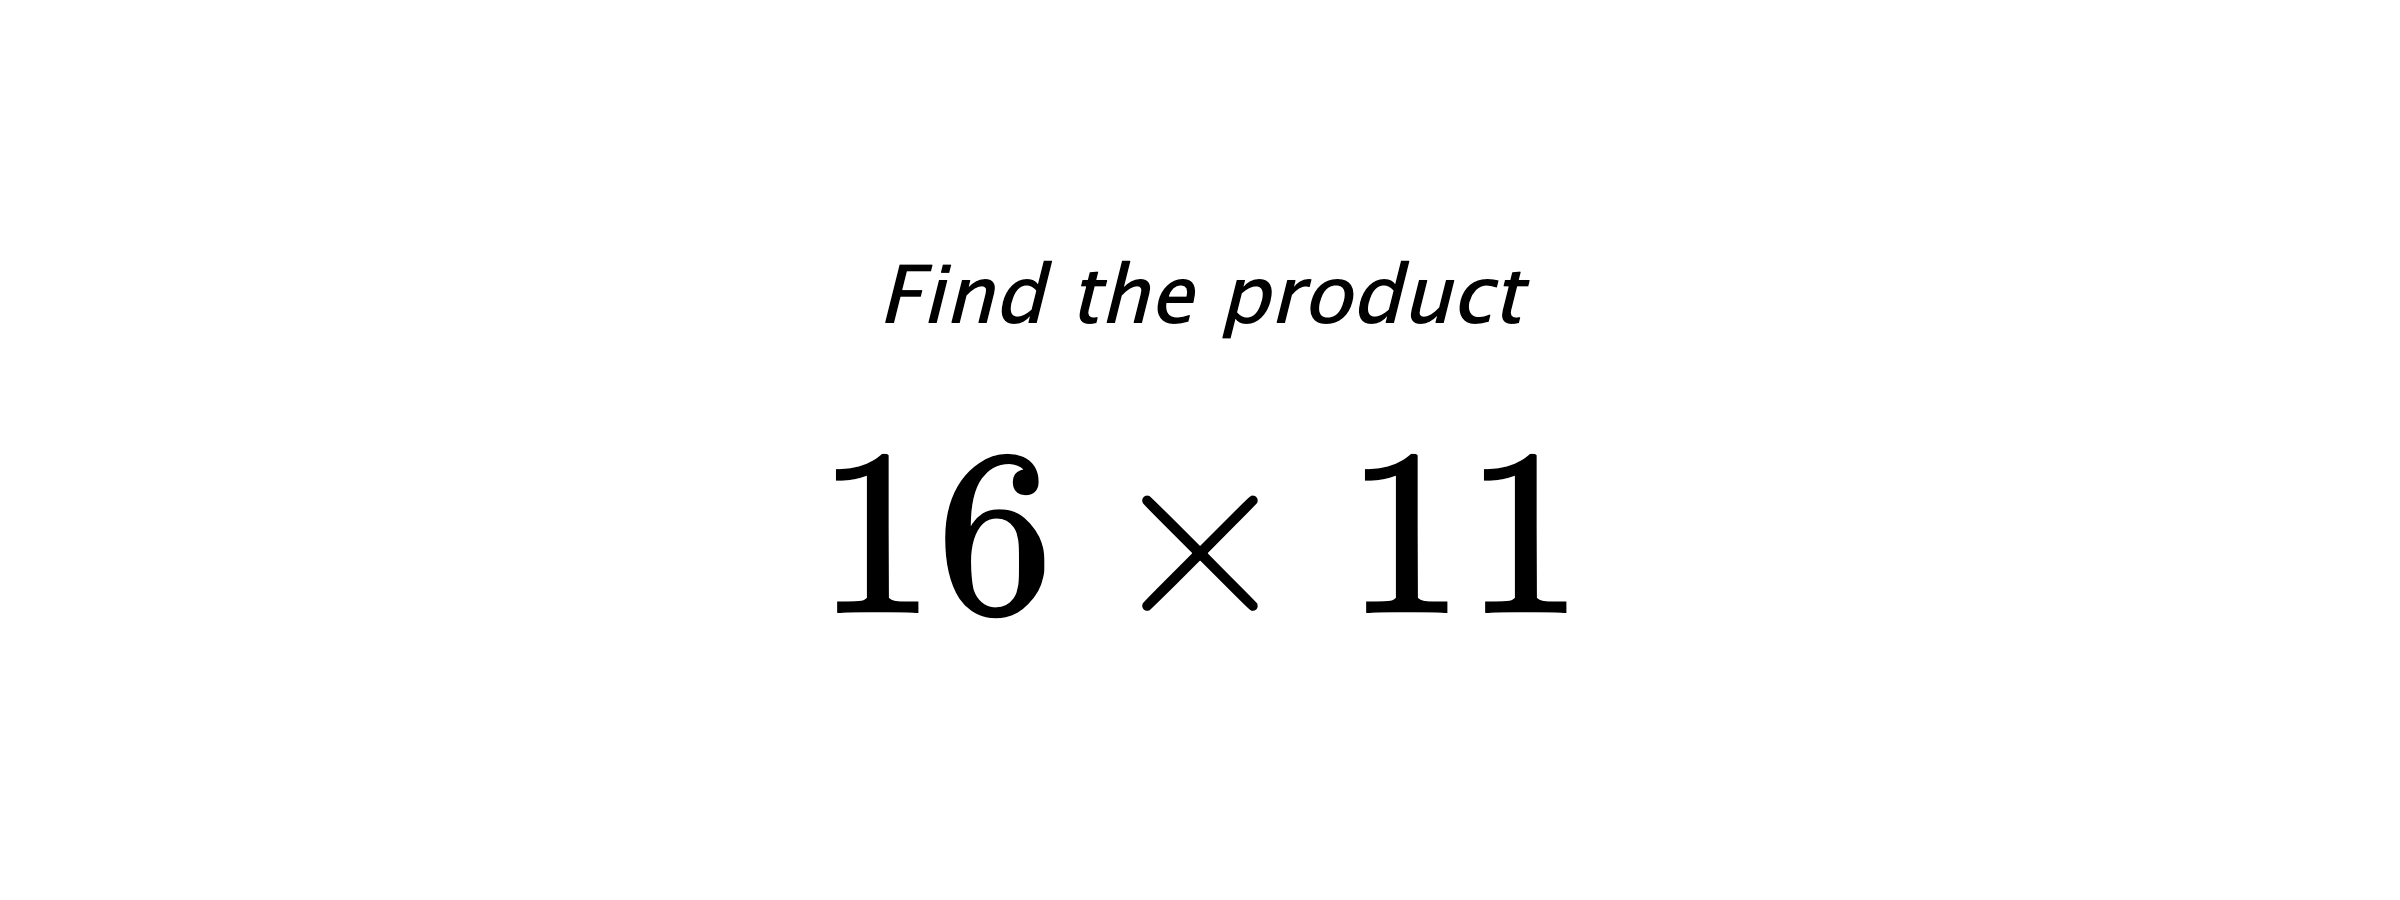 Find the product $ 16 \times 11 $